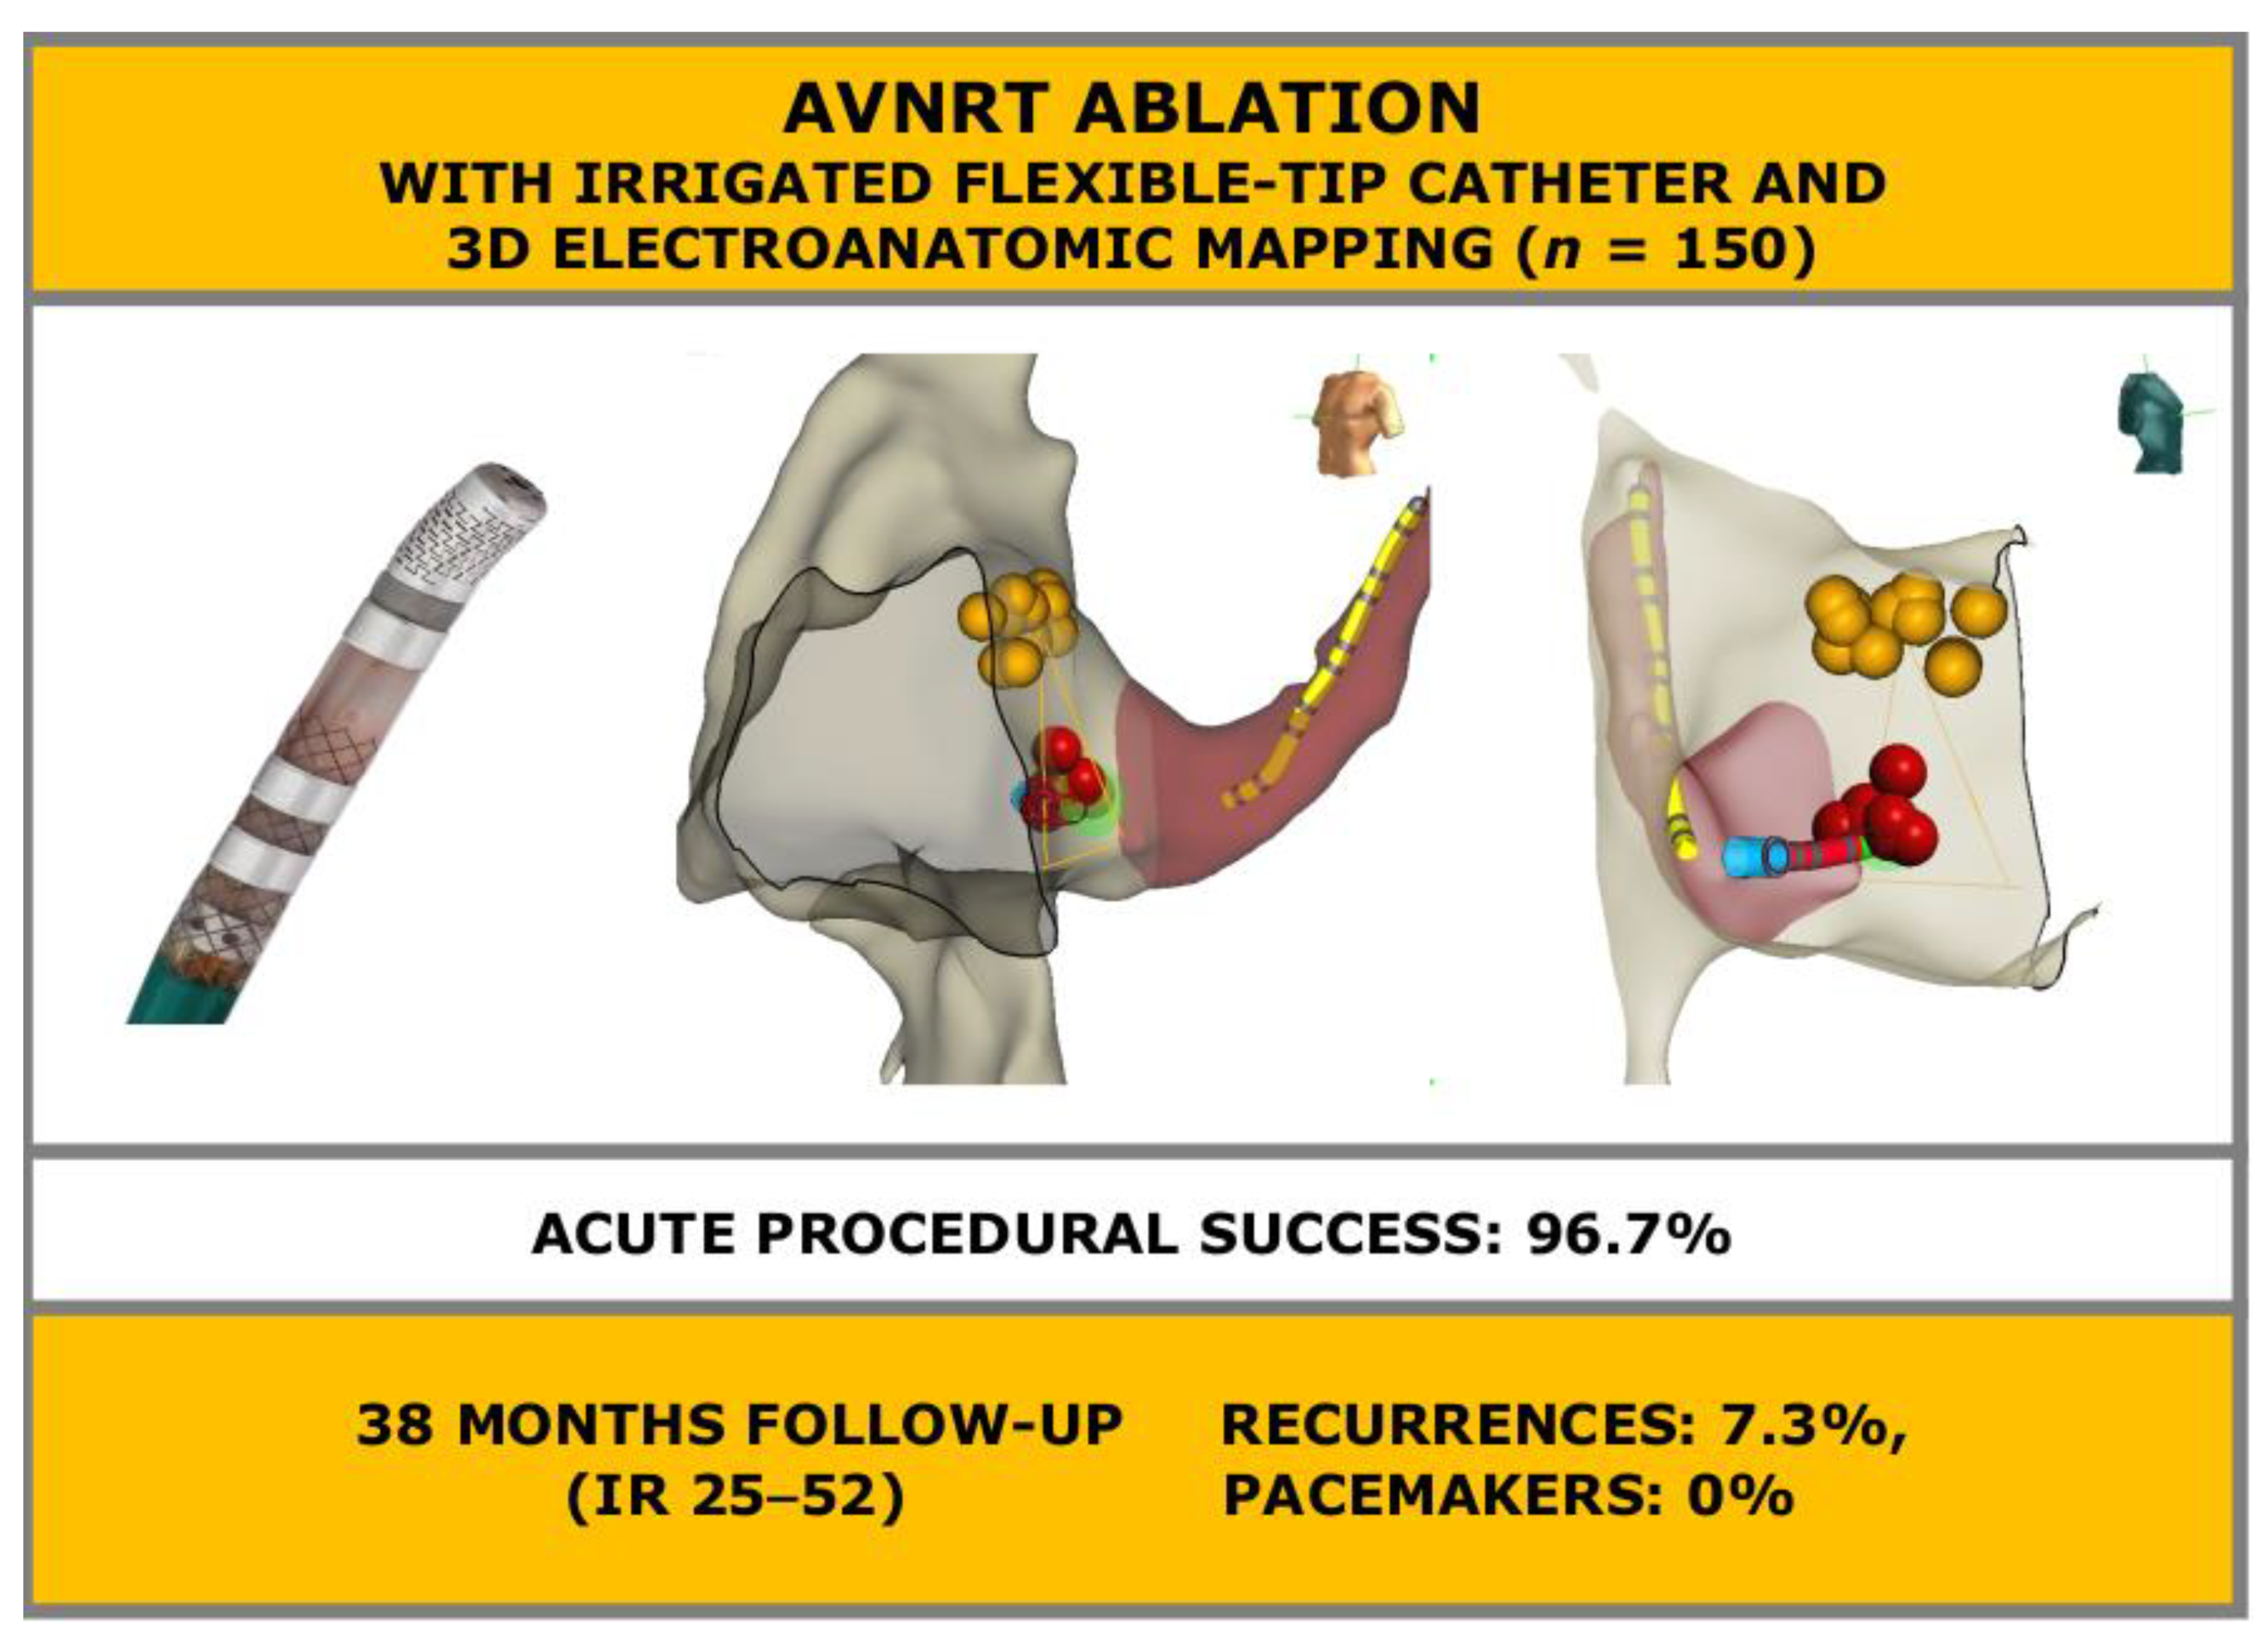 JCDD | Free Full-Text | Ablation of Atrioventricular Nodal Re-Entrant  Tachycardia Combining Irrigated Flexible-Tip Catheters and  Three-Dimensional Electroanatomic Mapping: Long-Term Outcomes